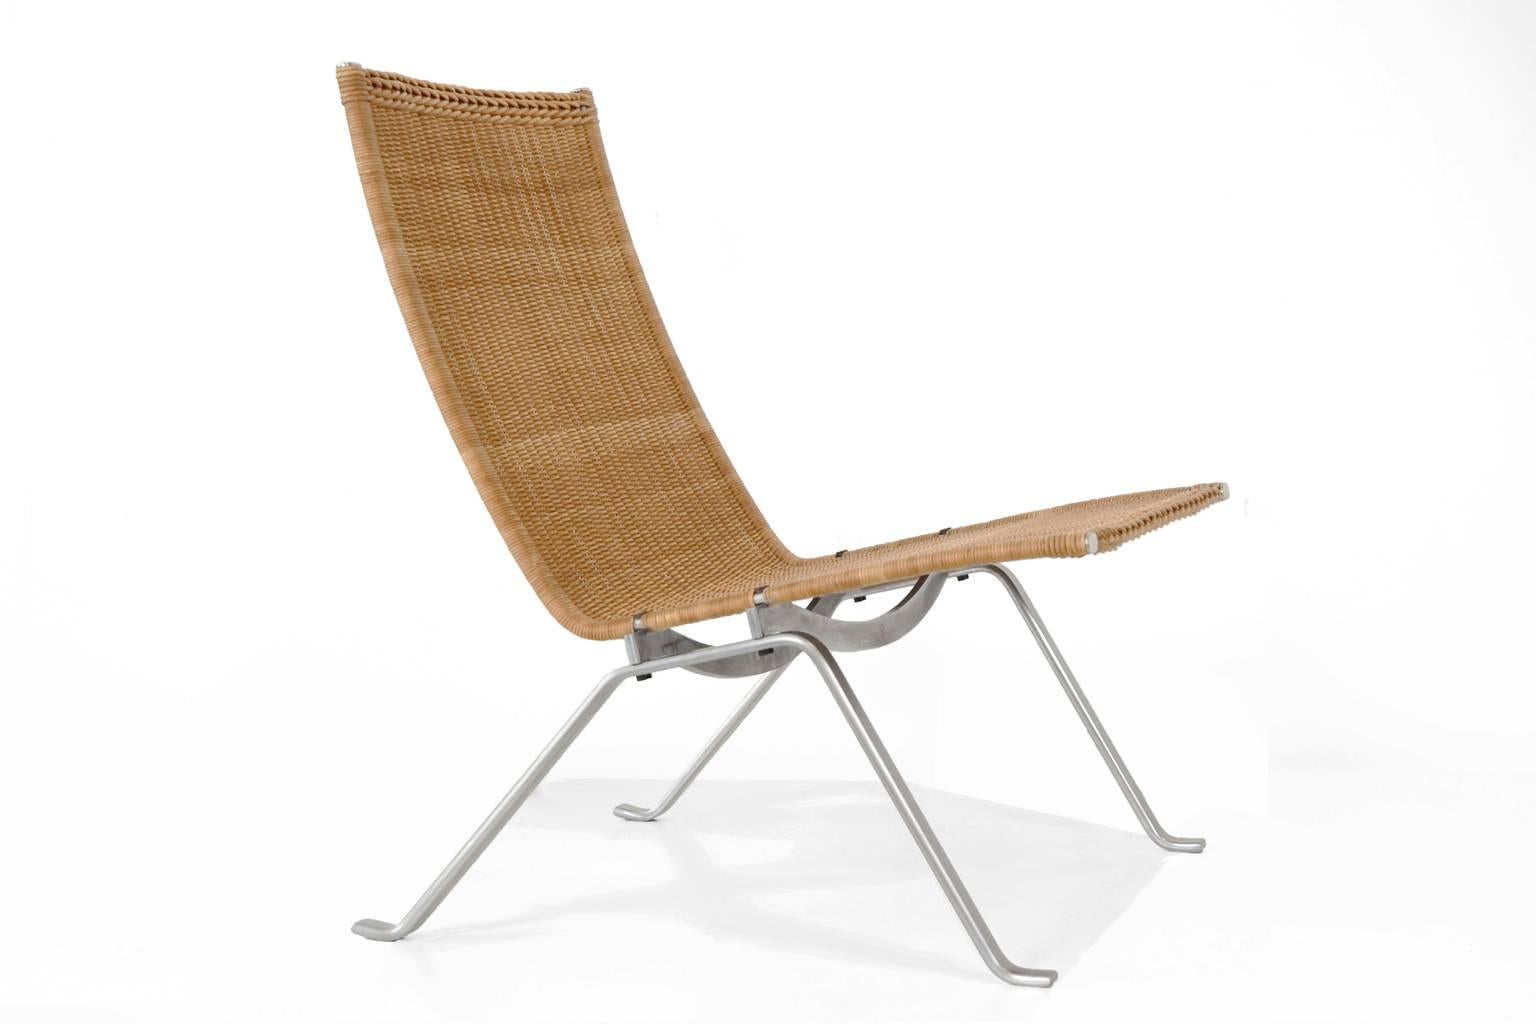 Rare first edition wicker PK 22 lounge chair designed by Poul Kjærholm for E. Kold Christensen, Denmark 1955. The PK22 is one of Kjaerholms masterworks. This is an old production from E. Kold, the manufacturer since the late fifties till the